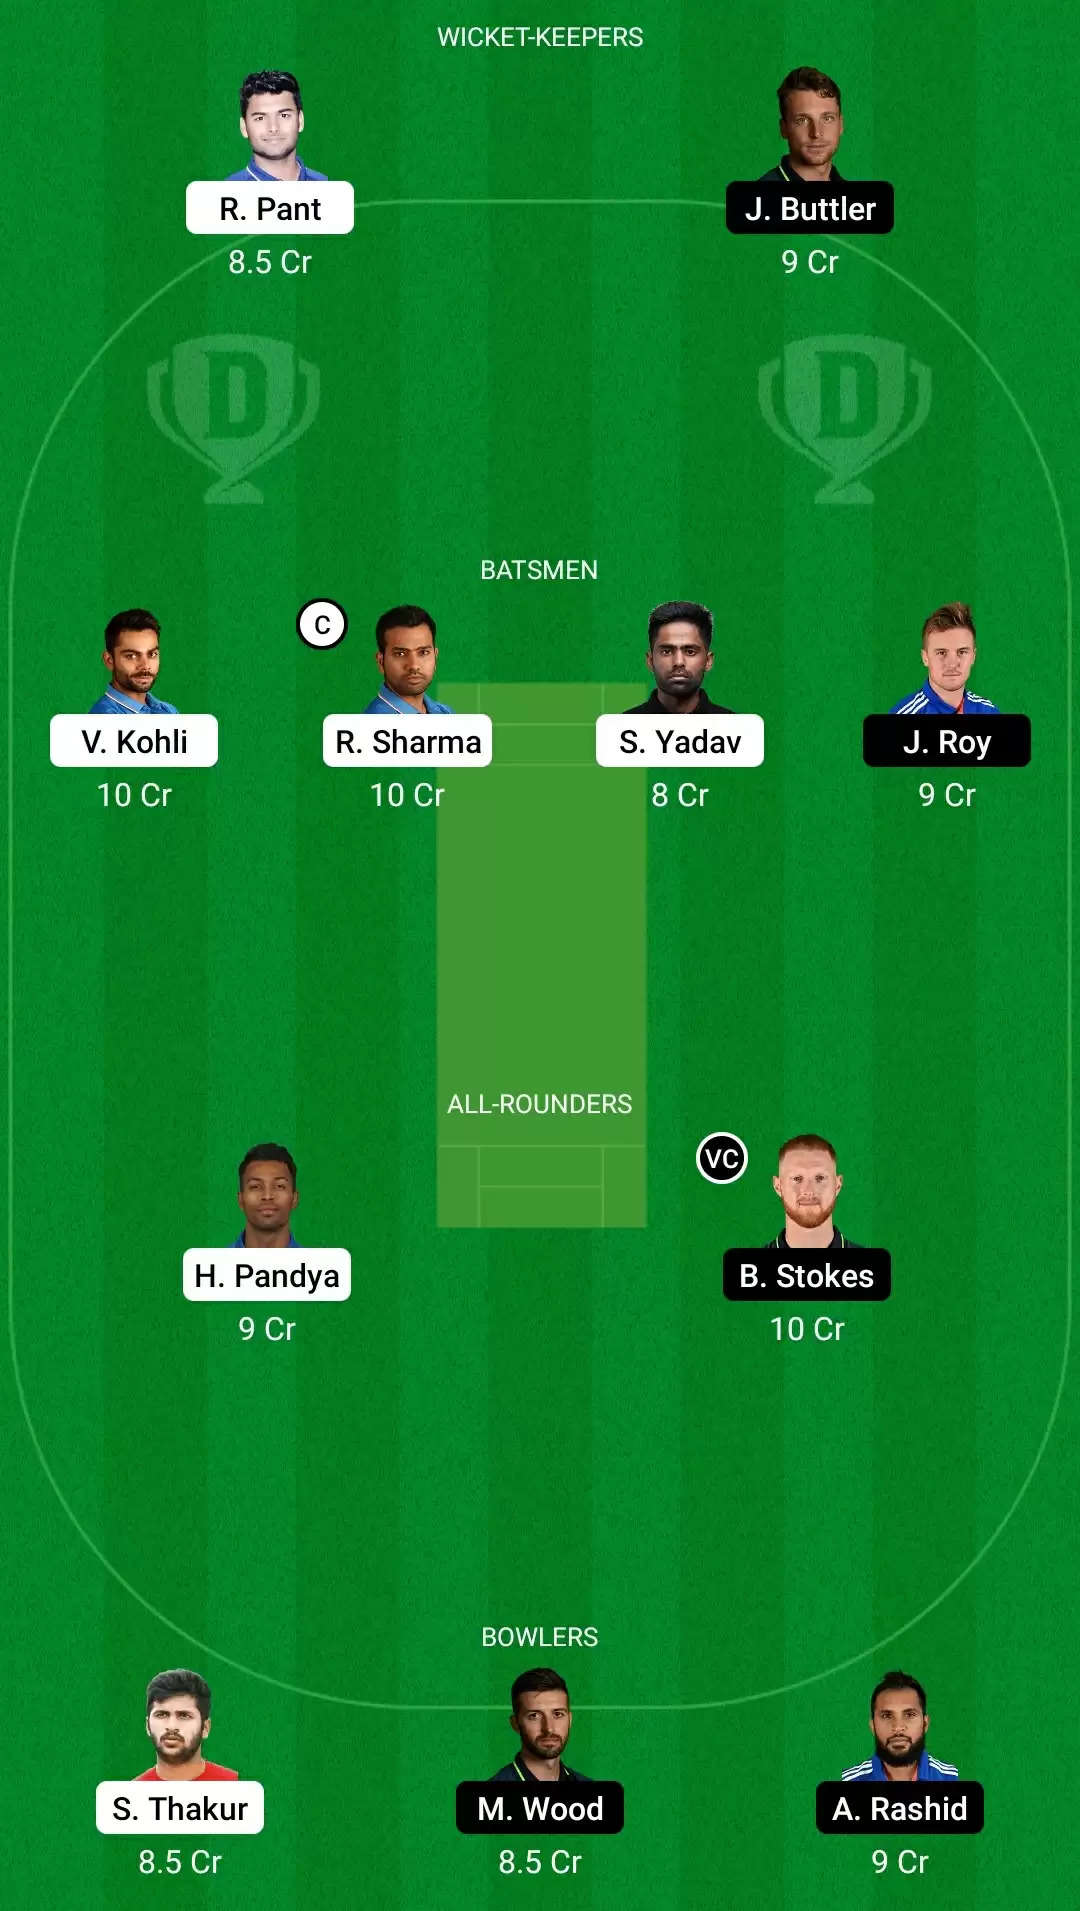 IND vs ENG Dream11 Team Prediction for 1st ODI : Best Fantasy Cricket Tips, Playing XI, Team & Top Player Picks